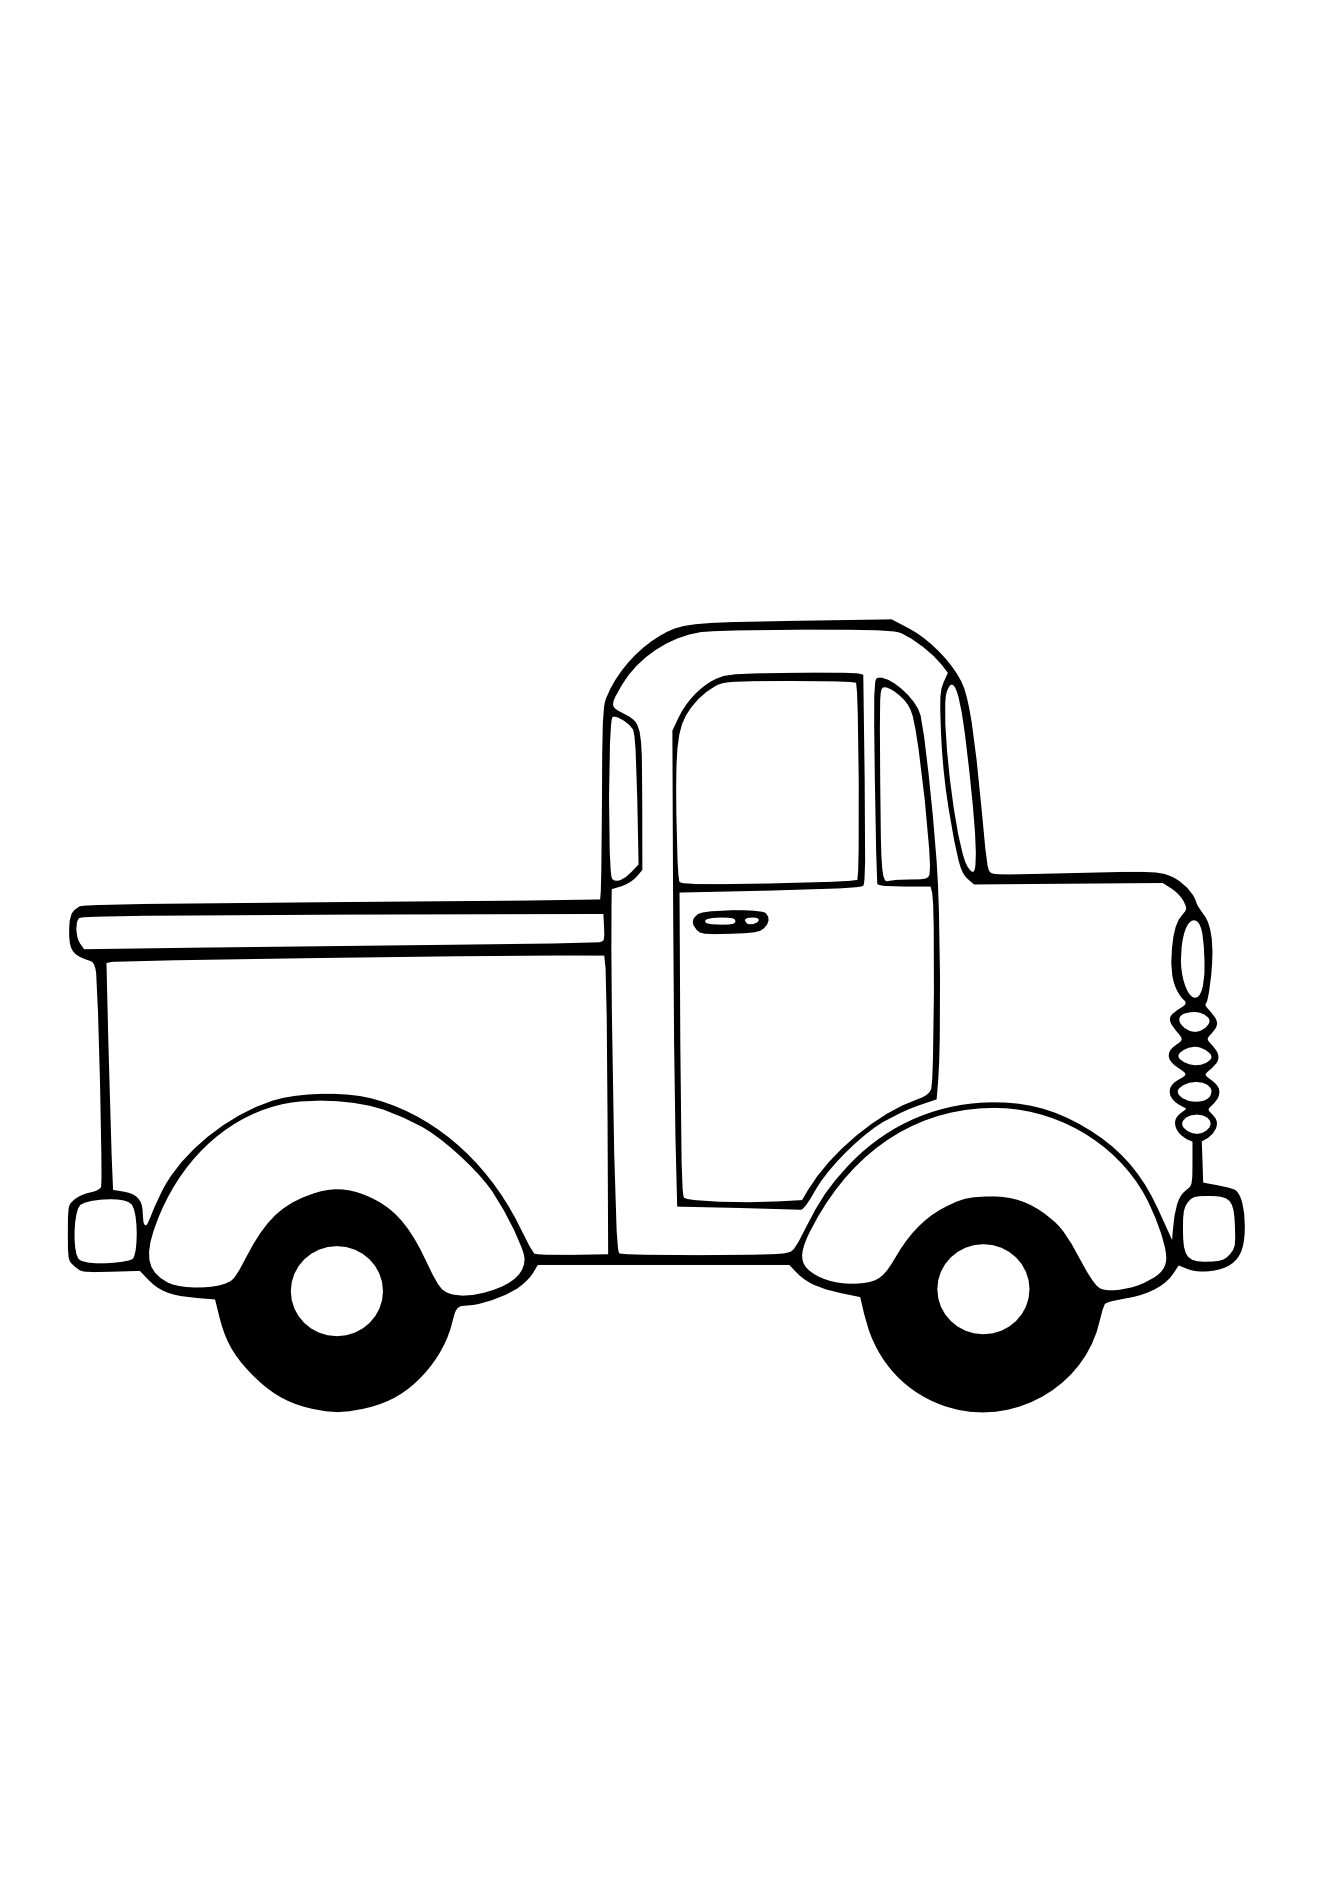 Chevy Truck Clipart Black And White | Clipart library - Free Clipart 